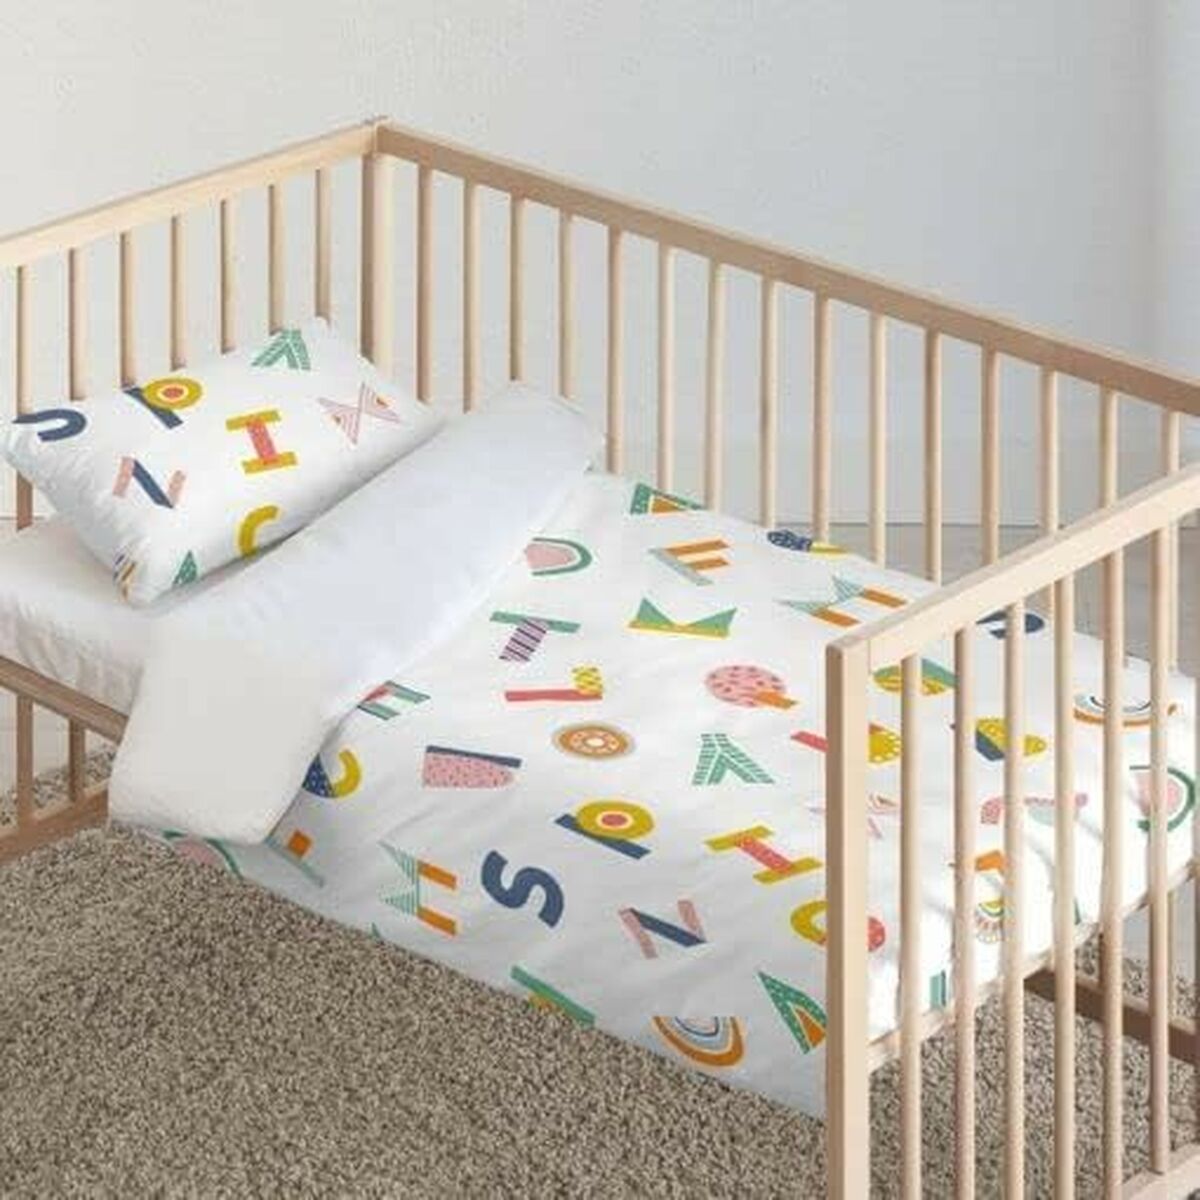 Cot Quilt Cover Kids&Cotton Urko Small 115 x 145 cm